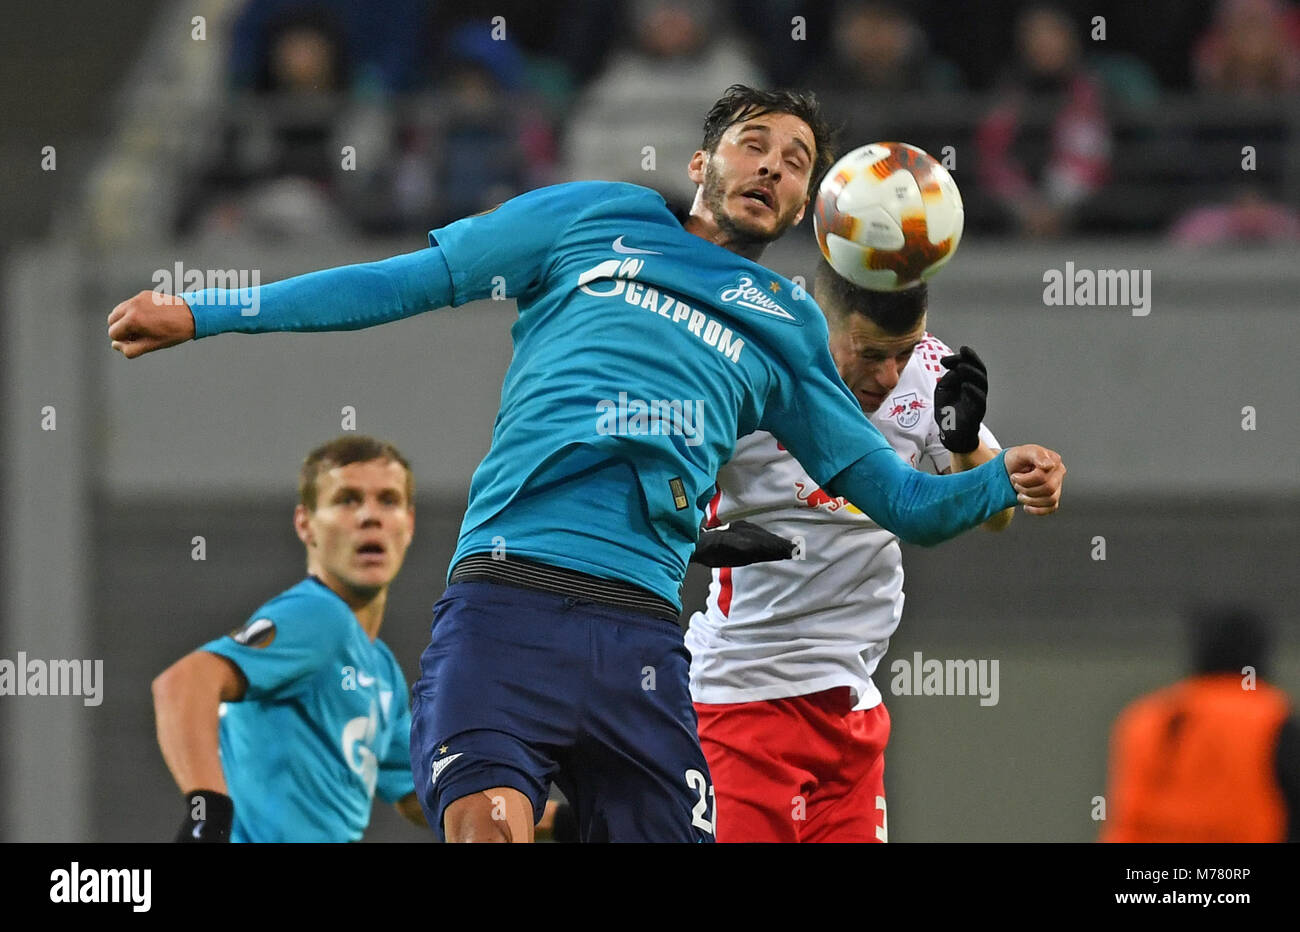 Leipzig, Germany. 08th Mar, 2018. 08 March 2018, Germany, Leipzig: Europa League match between RB Leipzig and Zenit St. Petersburg, Red Bull Arena: Leipzig's Diego Lemme (r) and St. Petersburg's Aleksandr Erokhin vie for the ball. Credit: Hendrik Schmidt/dpa-Zentralbild/dpa/Alamy Live News Stock Photo